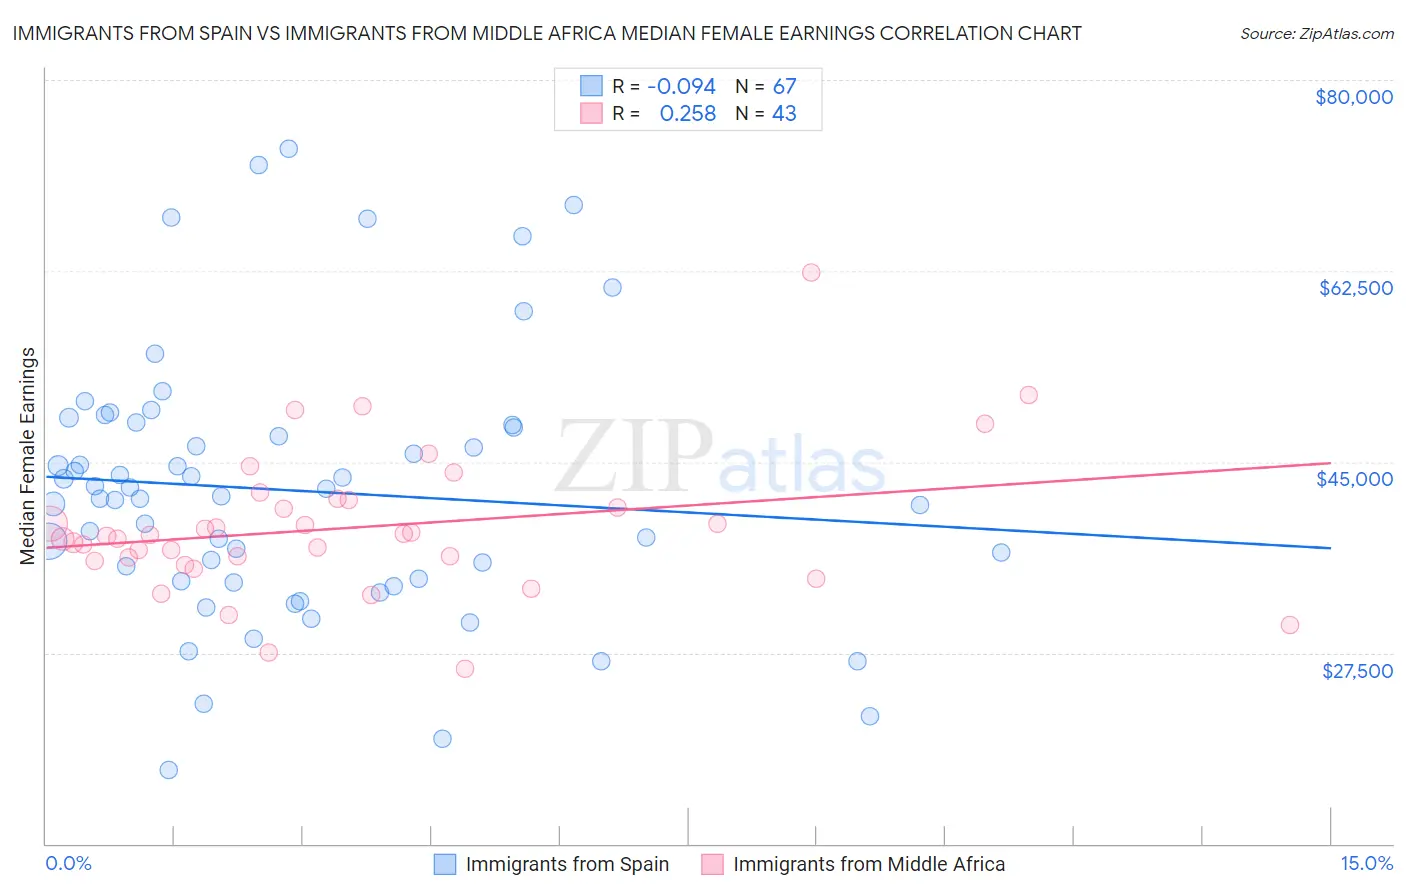 Immigrants from Spain vs Immigrants from Middle Africa Median Female Earnings